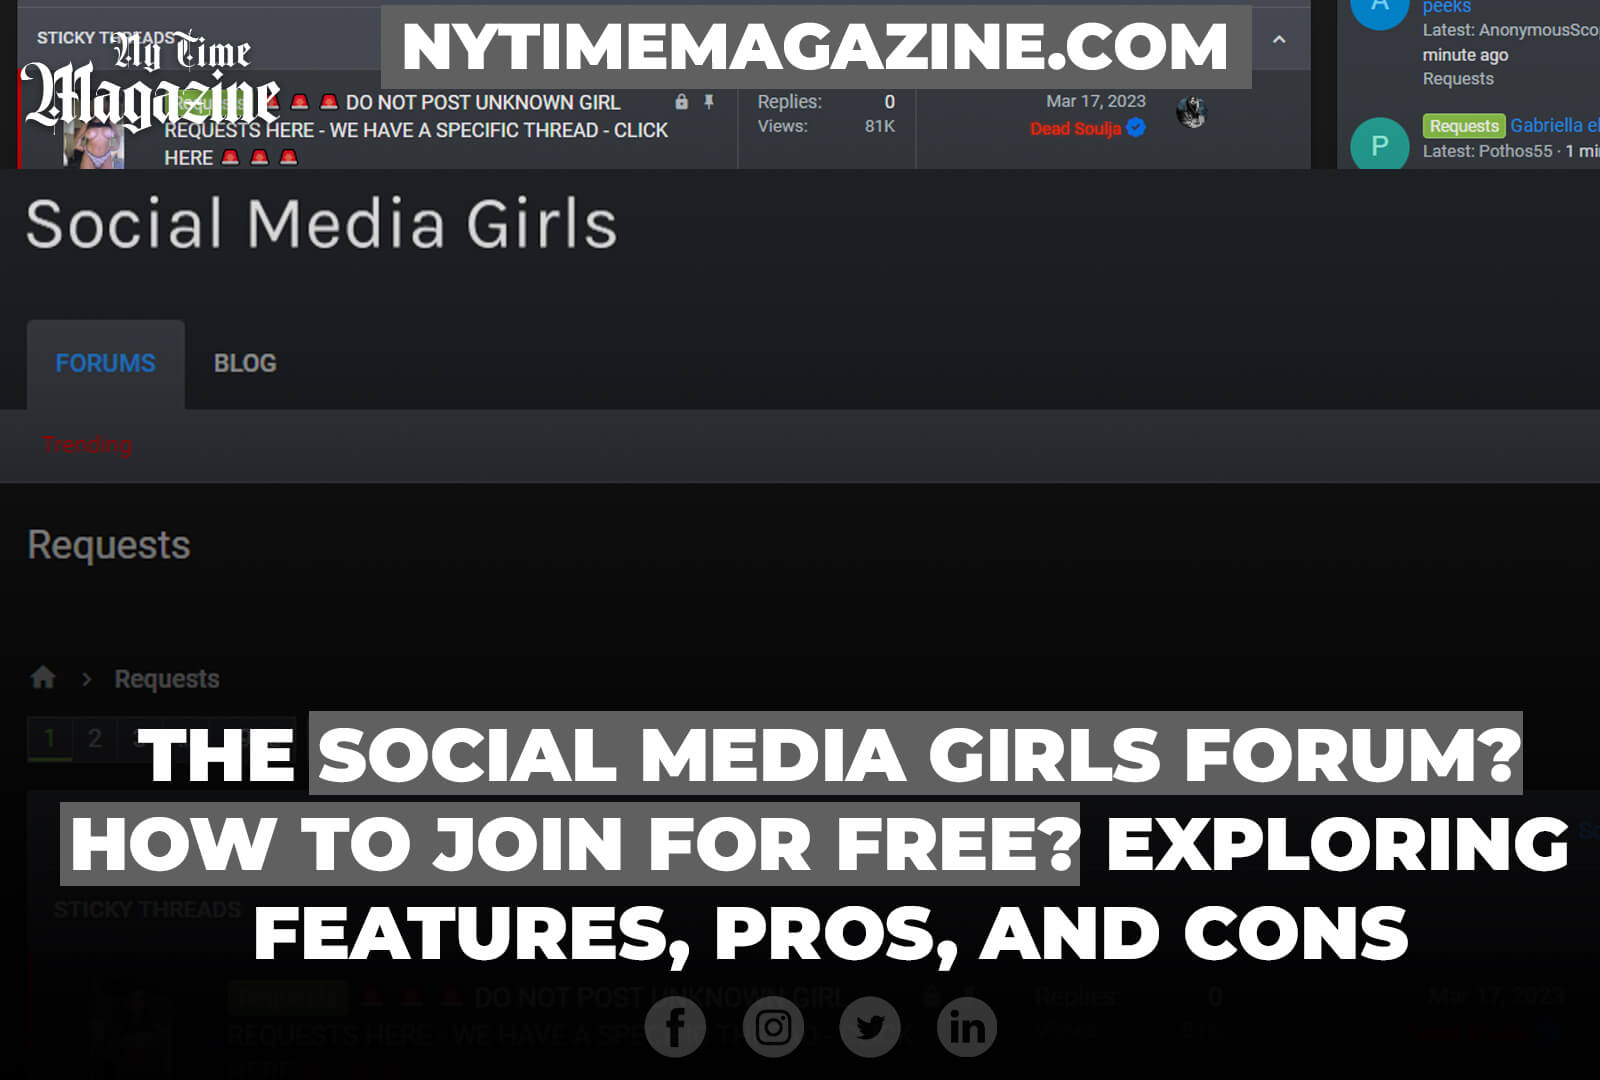 WHAT IS THE SOCIAL MEDIA GIRLS FORUM? HOW TO JOIN FOR FREE? EXPLORING FEATURES, PROS, AND CONS